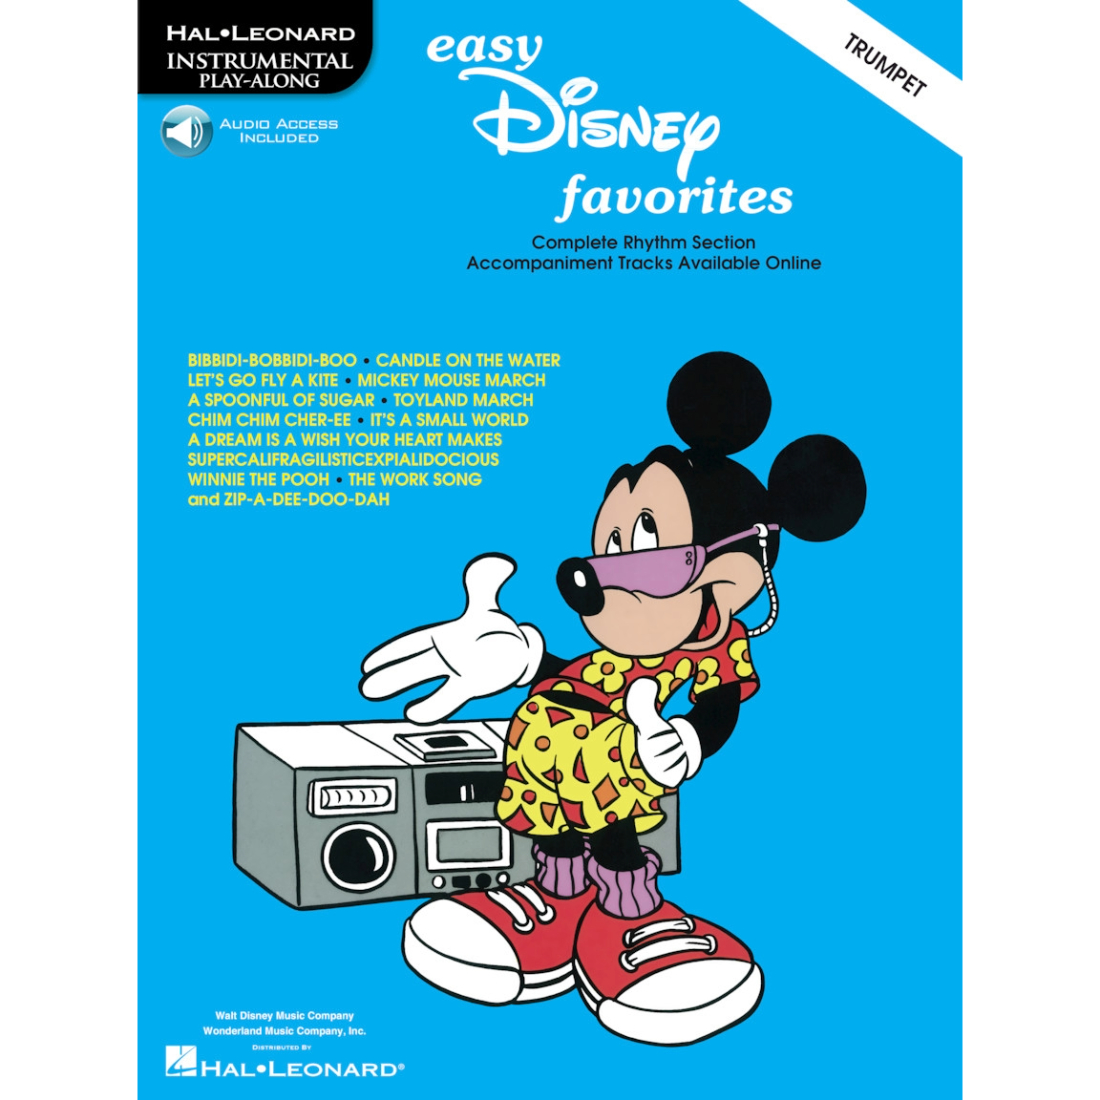 Blue cover with image of mickey mouse, titled easy Disney favorites